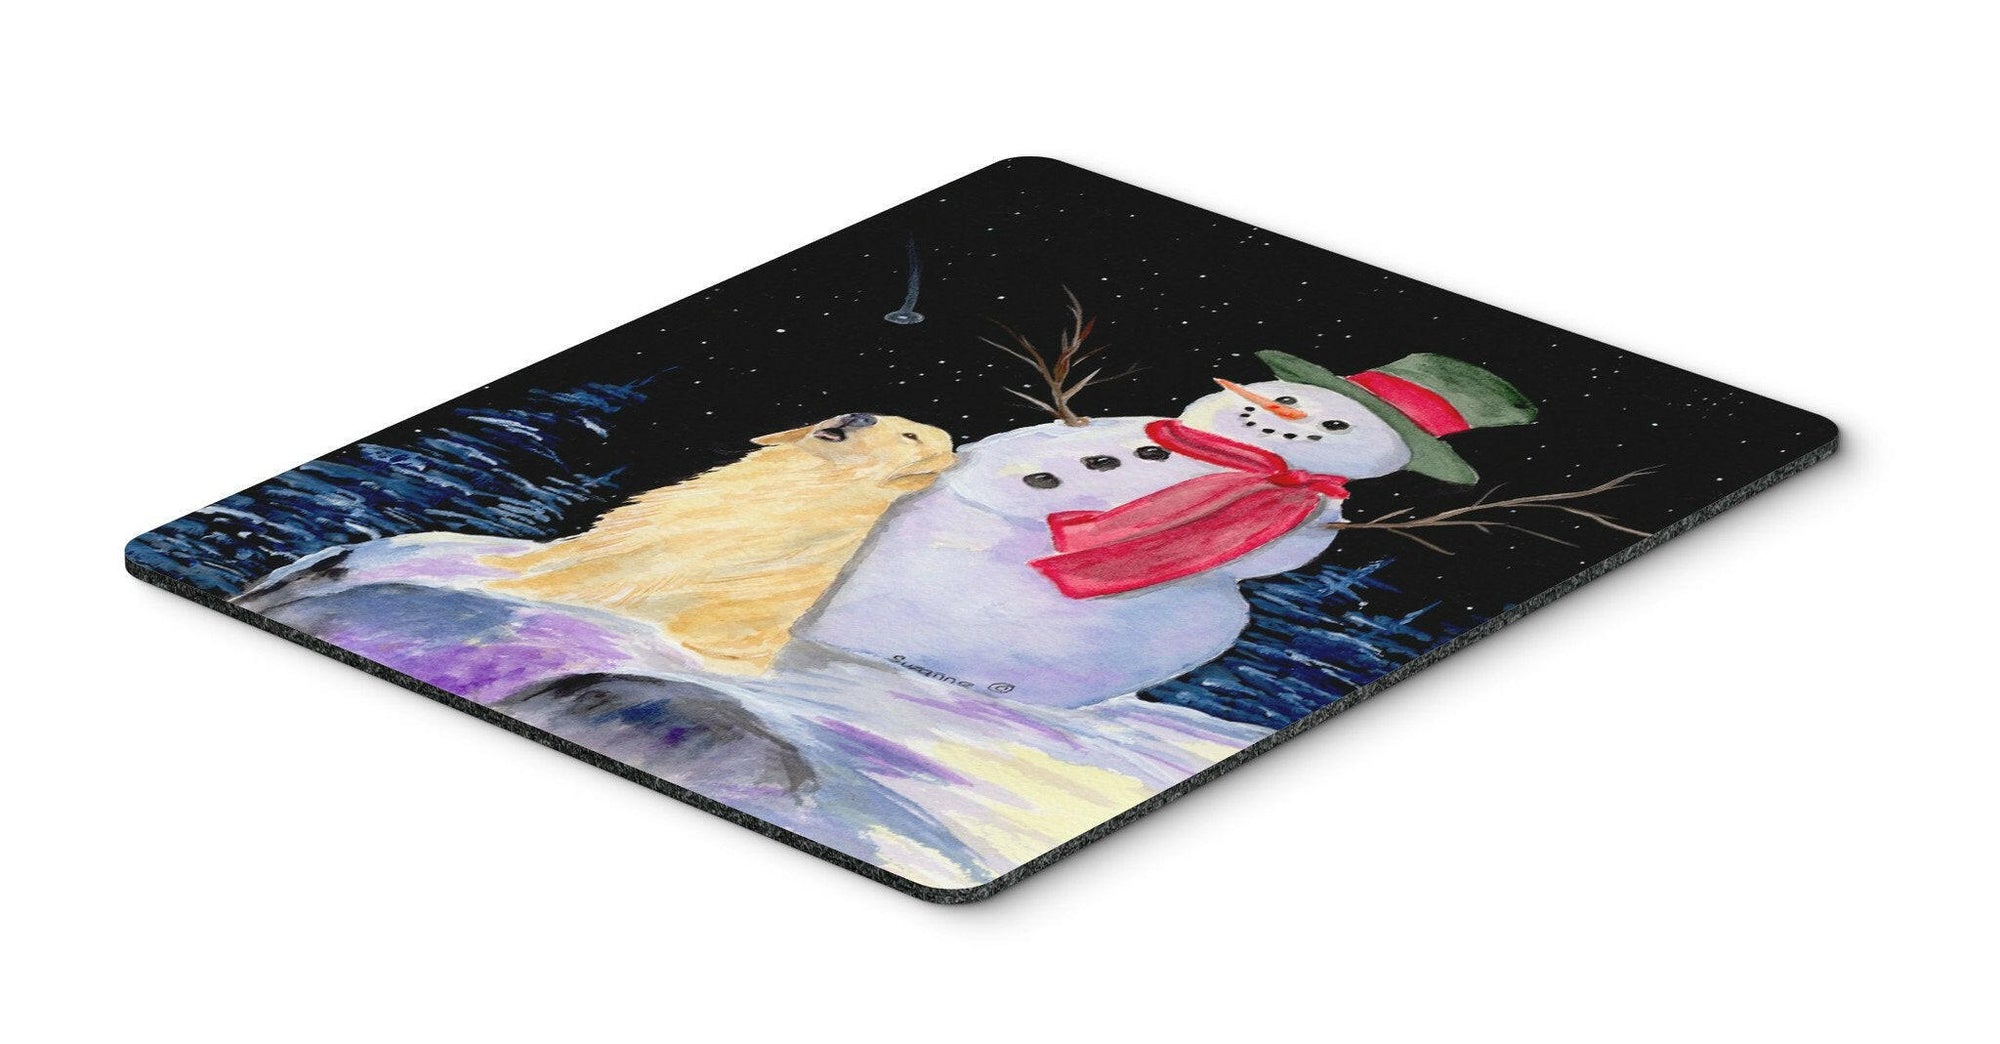 Snowman with Golden Retriever Mouse Pad / Hot Pad / Trivet by Caroline's Treasures